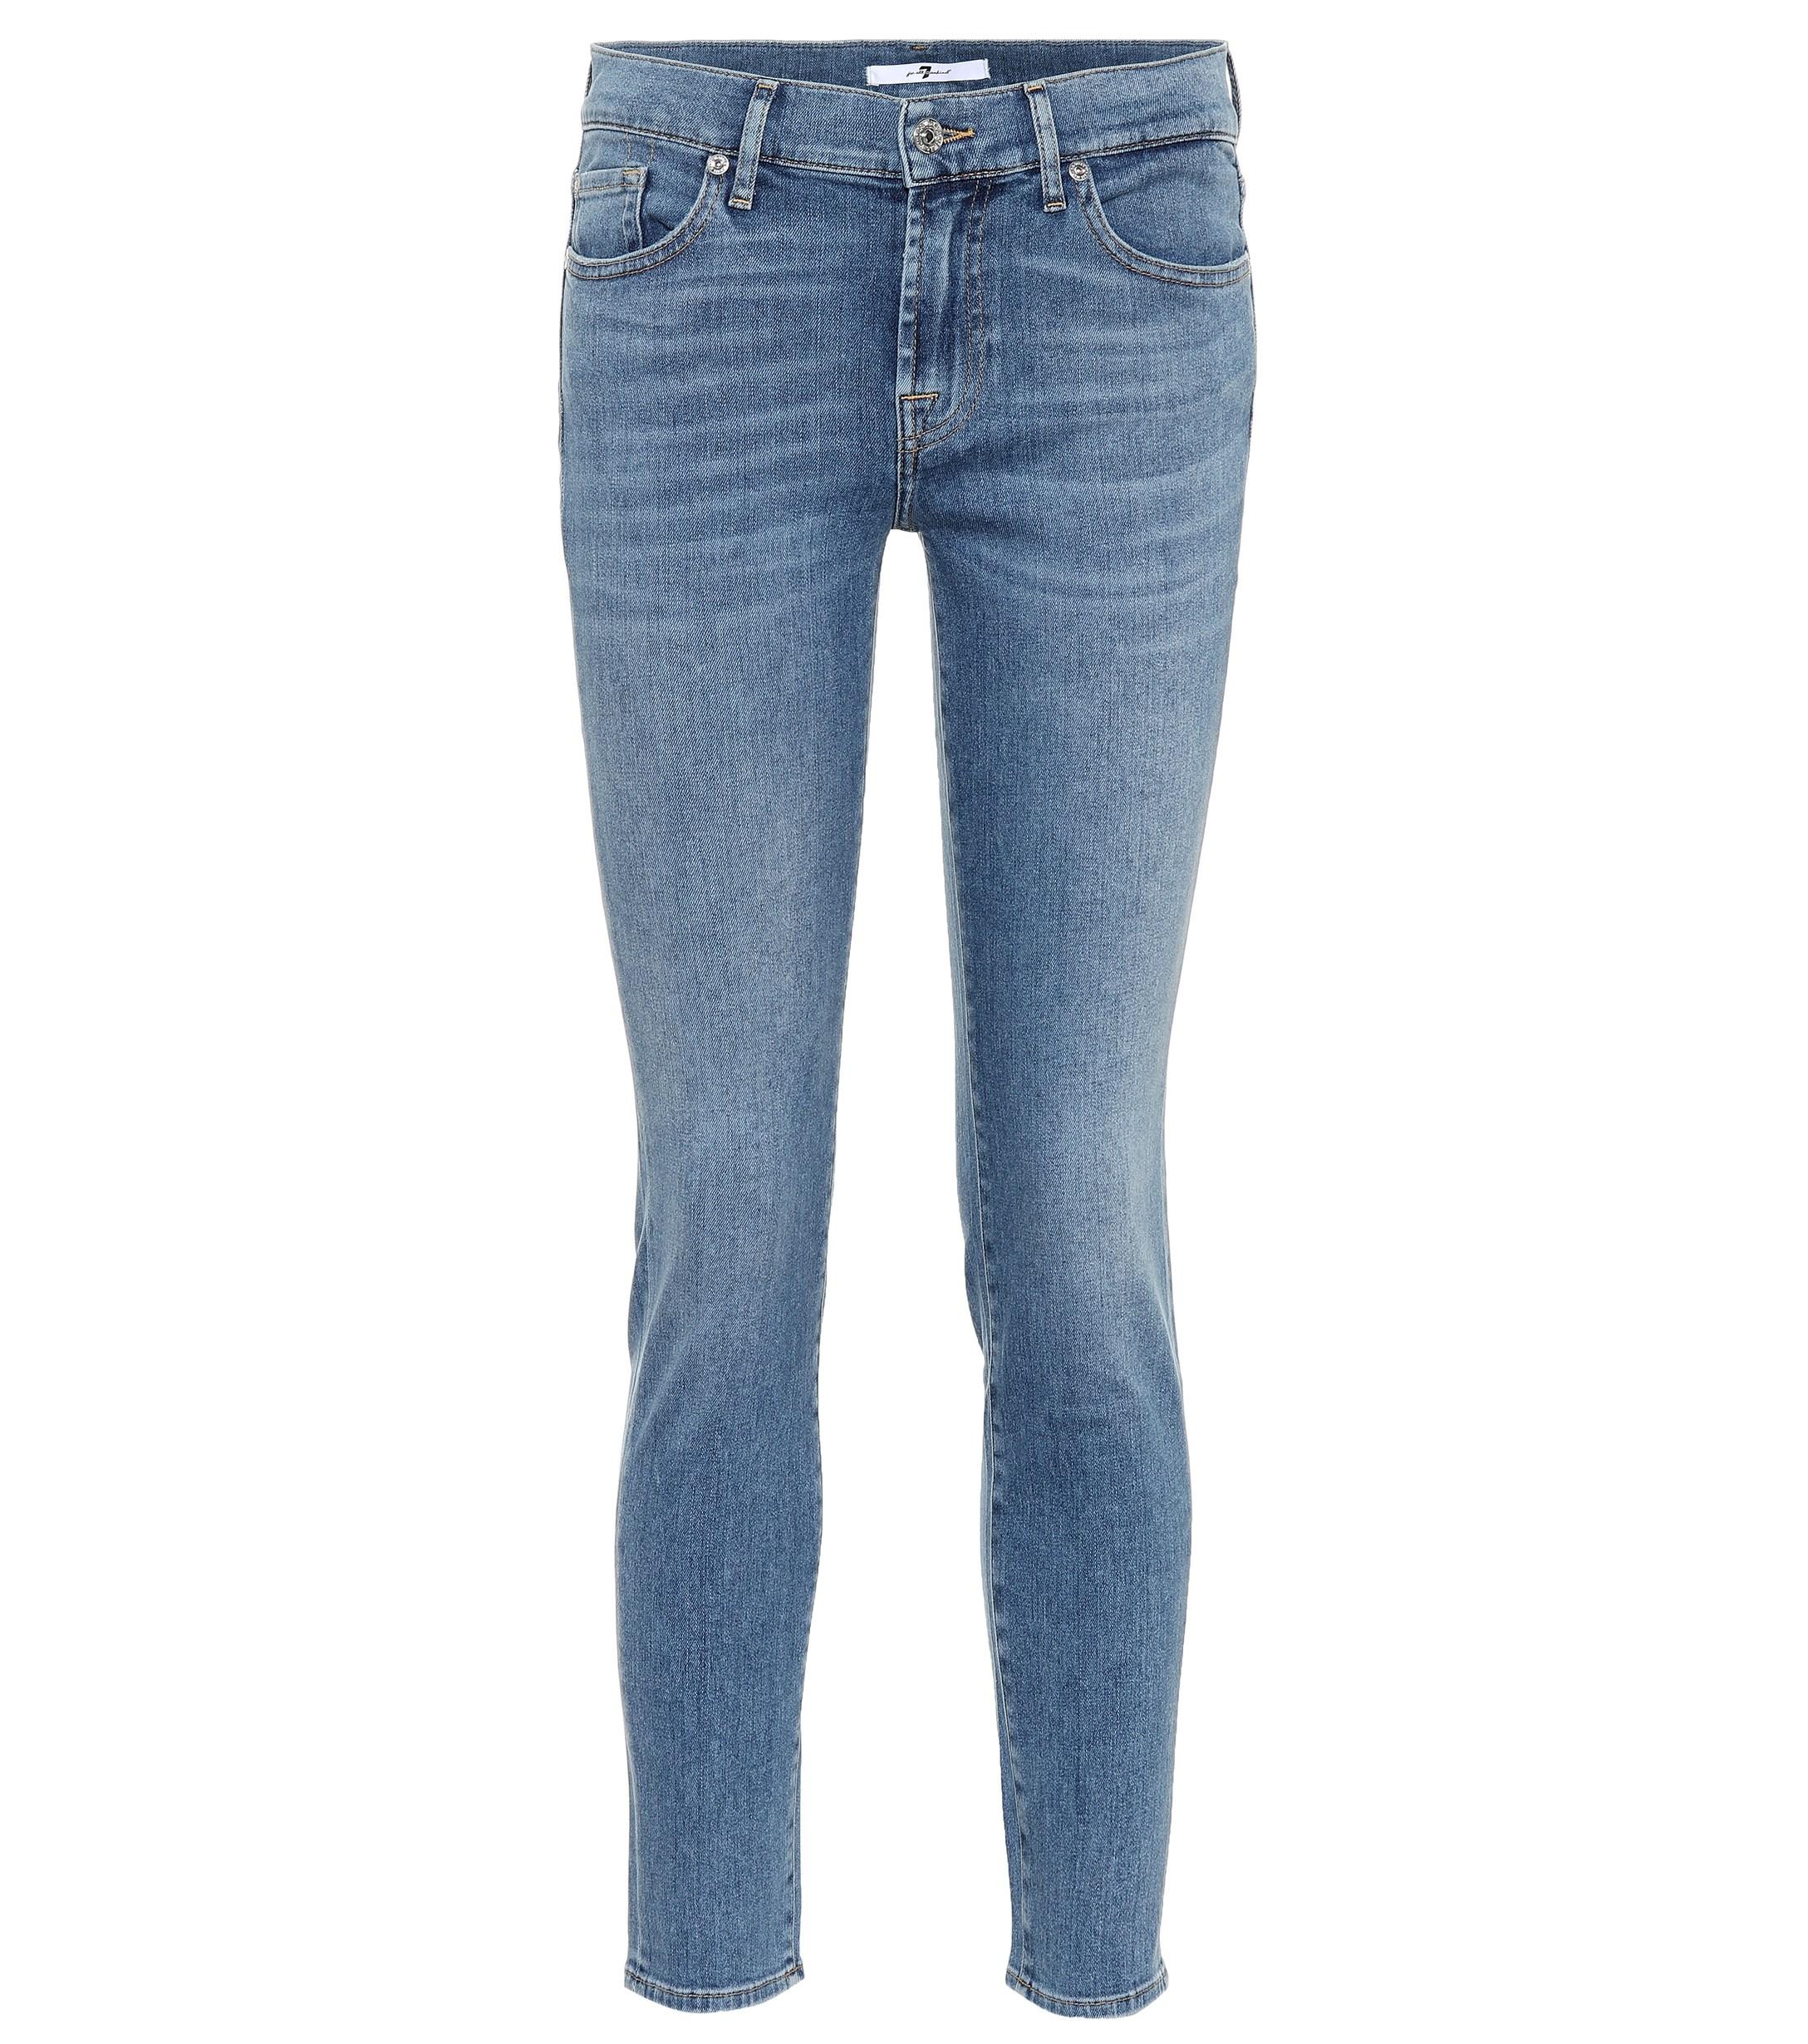 Lyst - 7 For All Mankind Roxanne Mid-rise Skinny Jeans in Blue